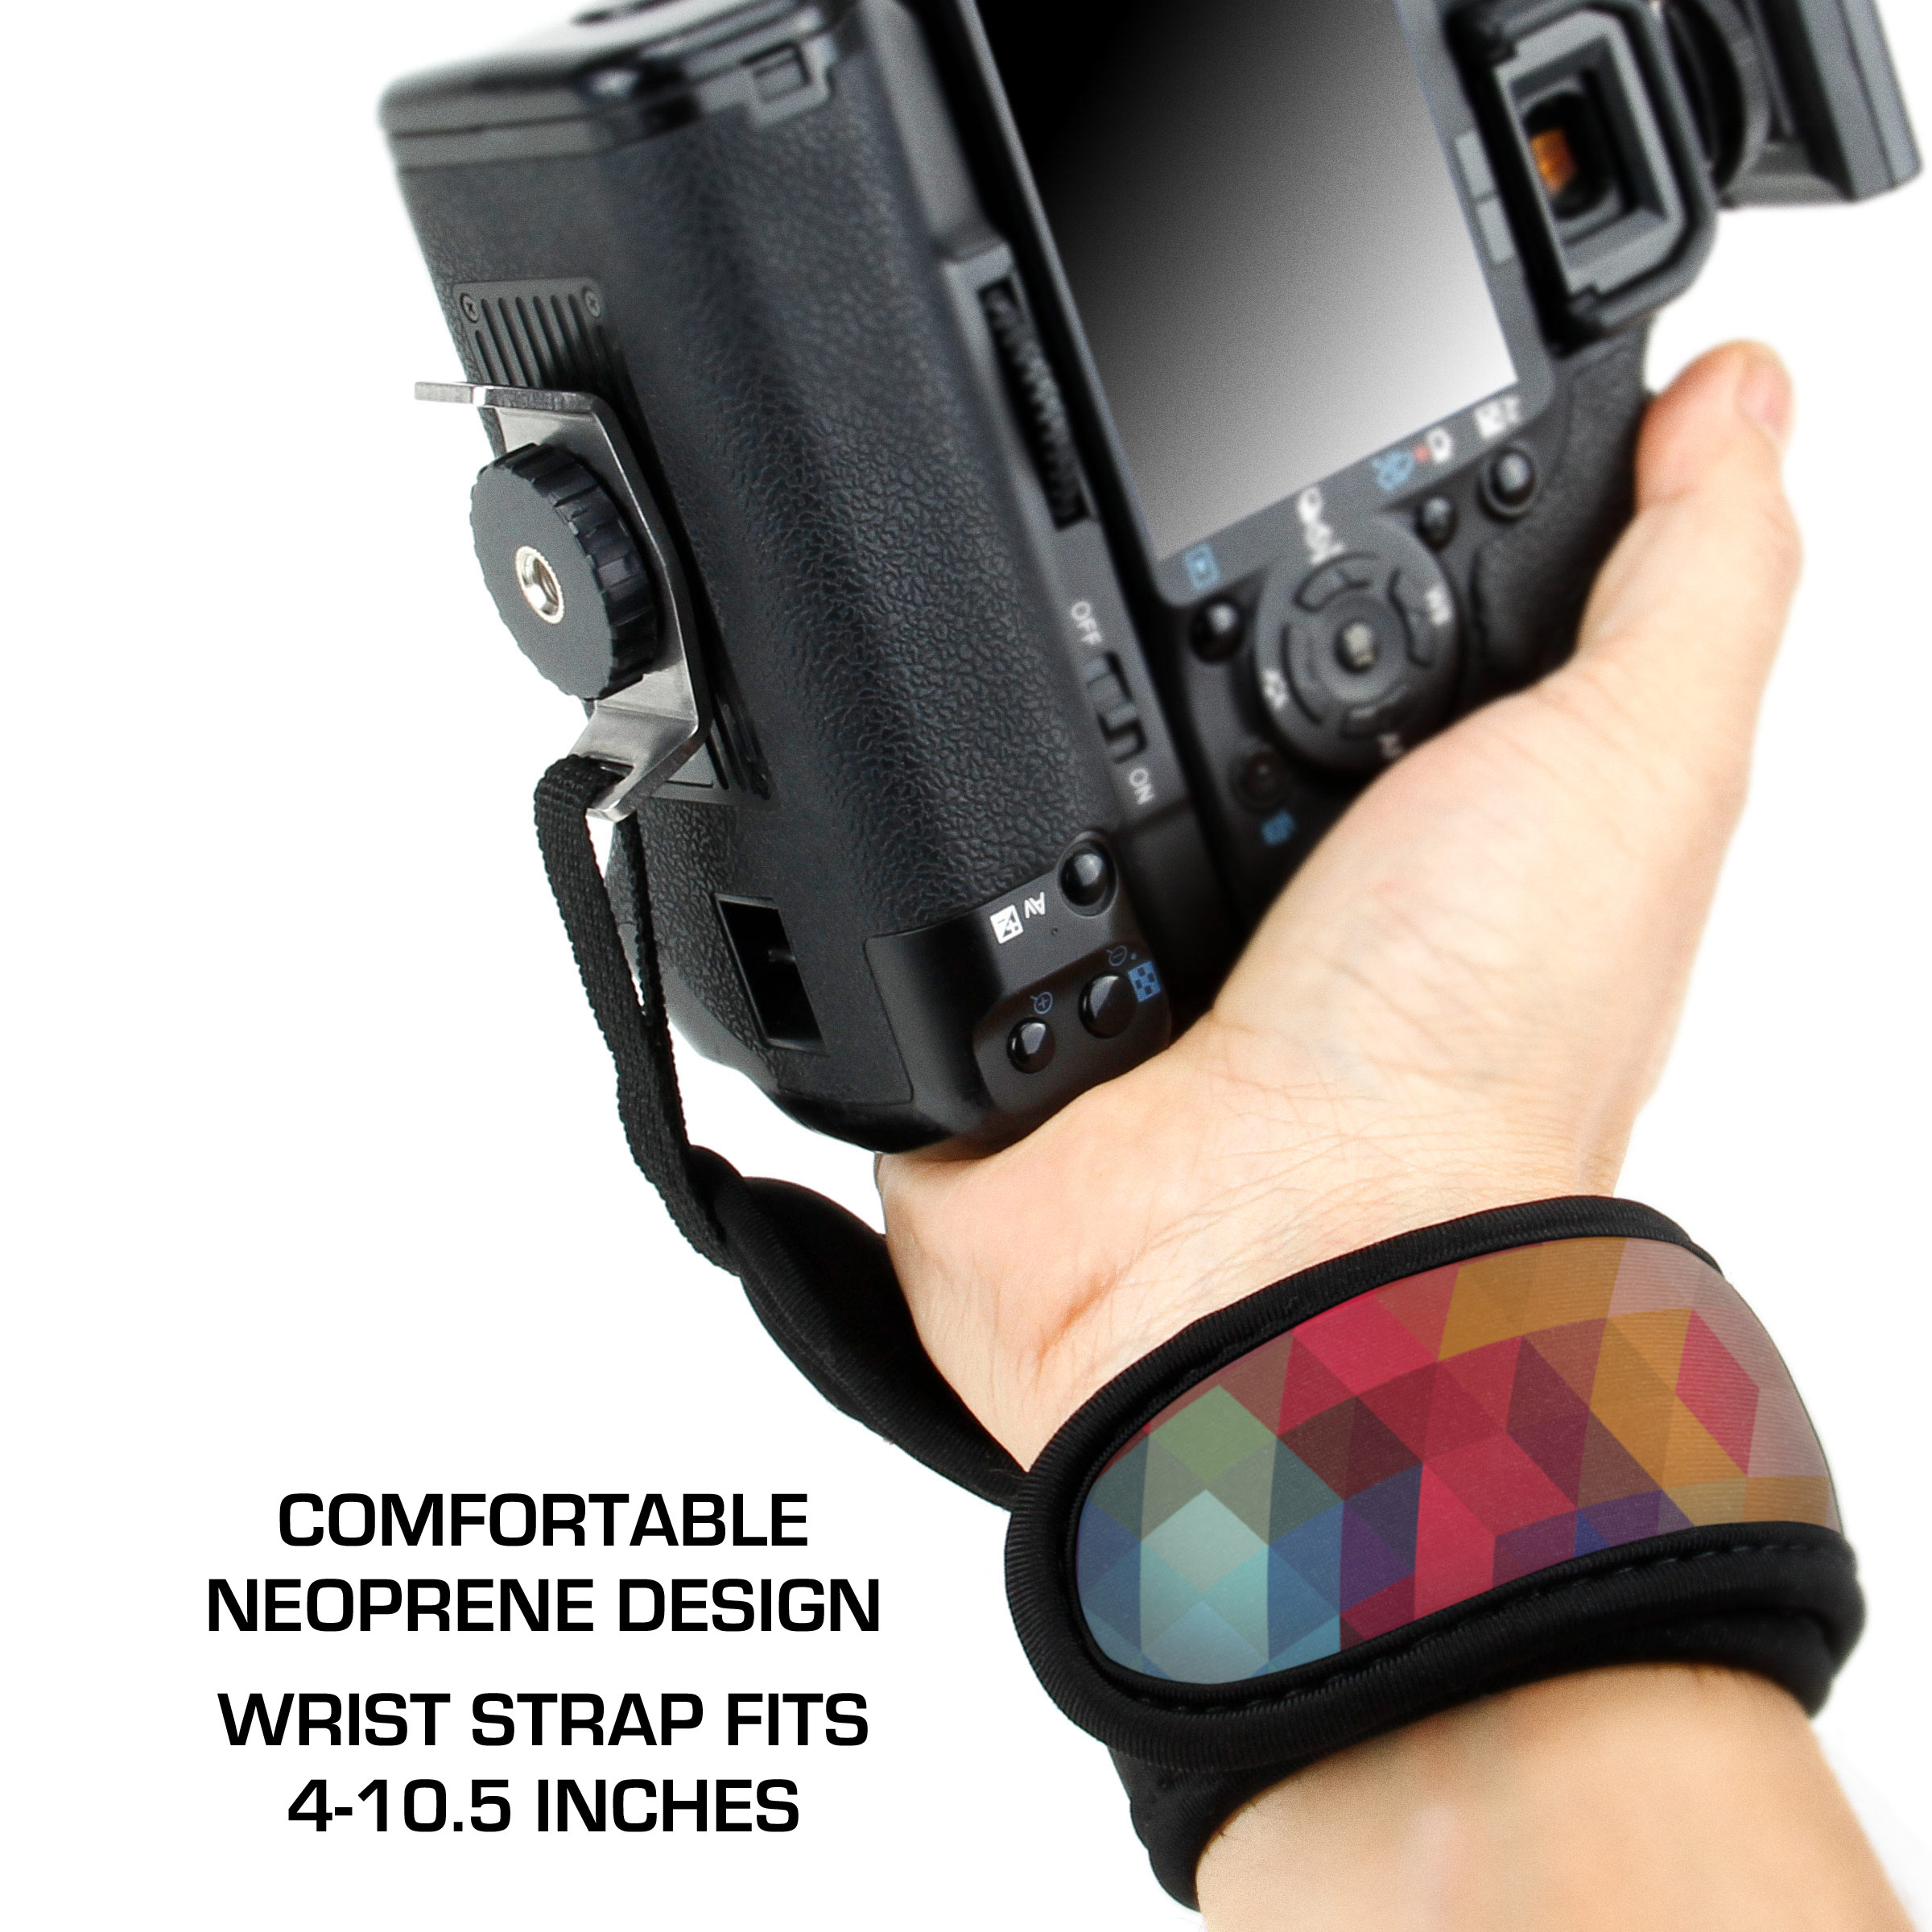 USA GEAR Professional Camera Grip Hand Strap - image 5 of 9